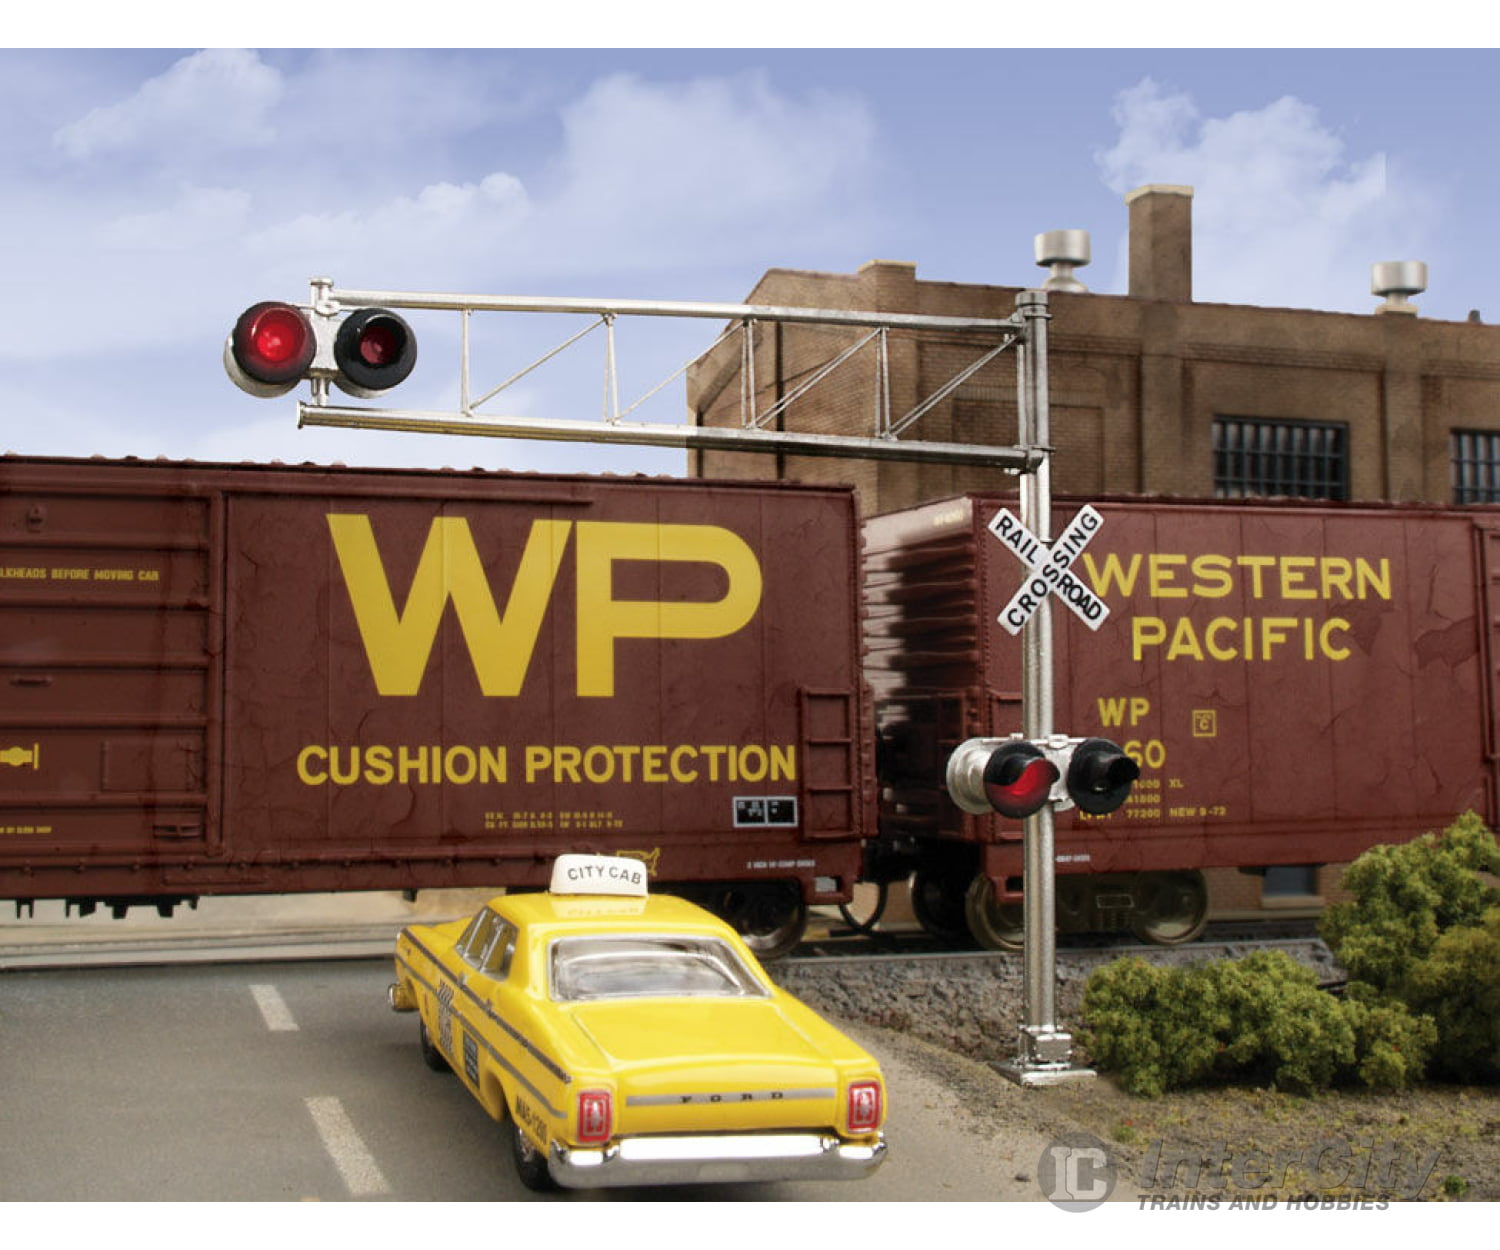 Walthers Scenemaster 4332 Post-1960S Cantilever Grade Crossing Signal -- Single-Lane Signals &